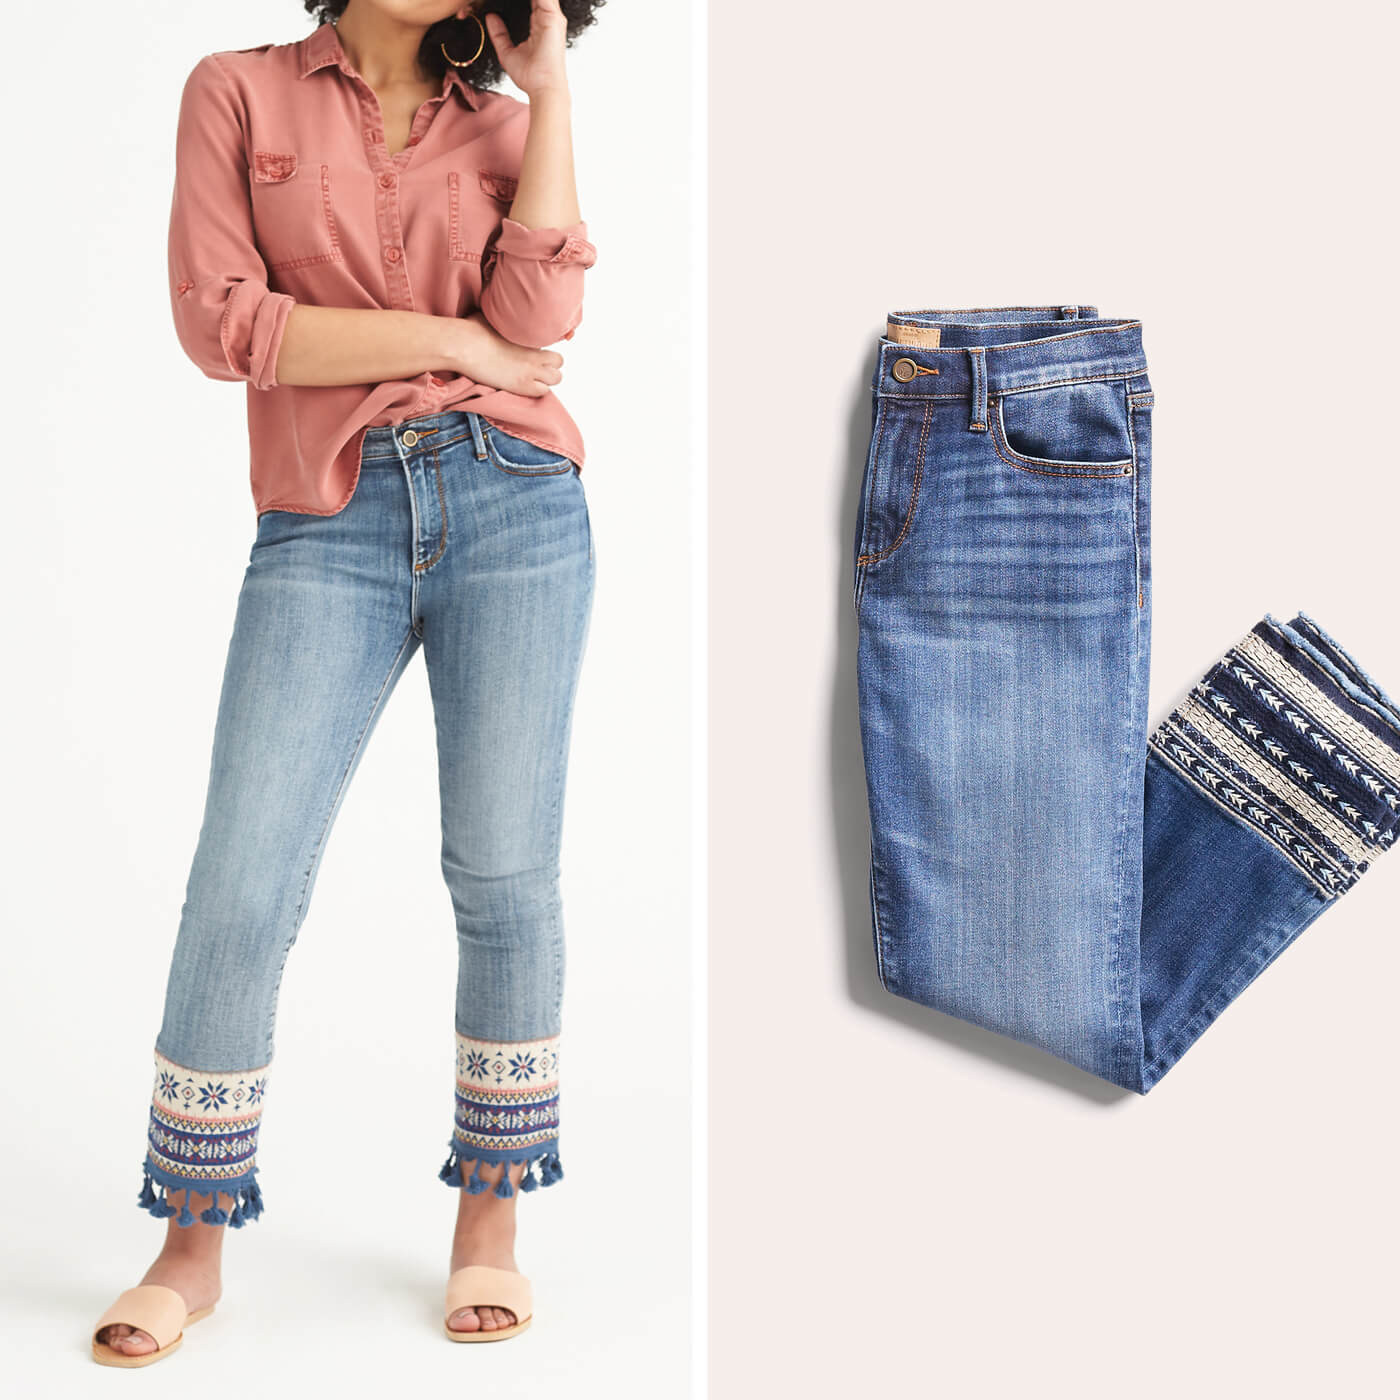 How Women's Jeans Should Fit (with Pictures) - Petite Dressing